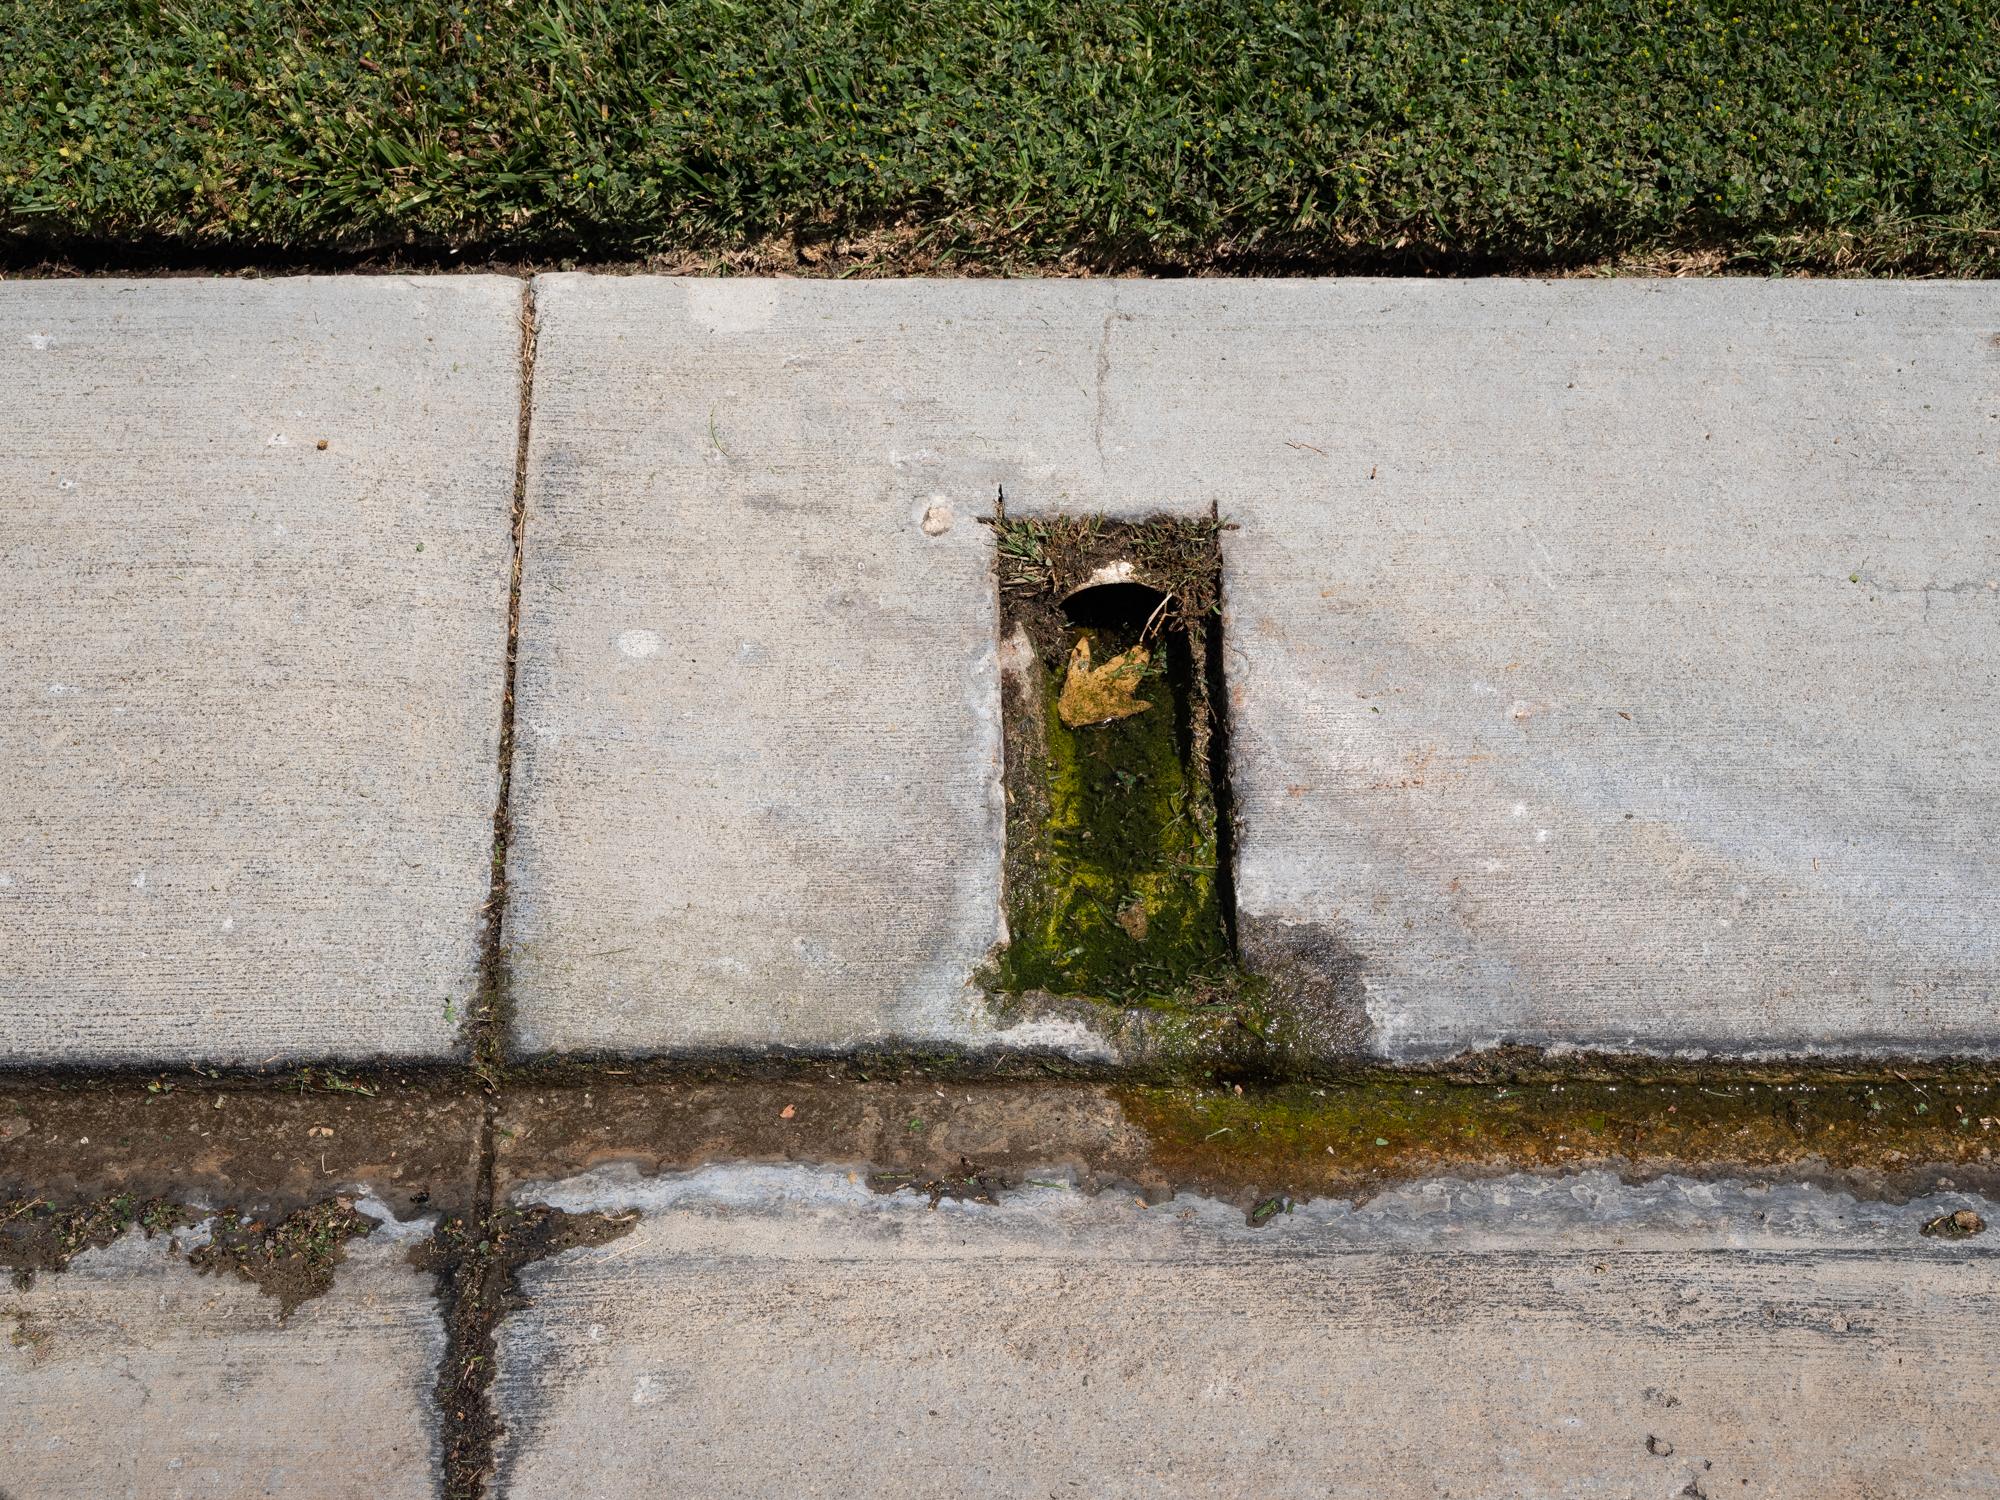 Water Cops - Wall Street Journal - Water runoff breeds algae in front of a home in The Oaks...